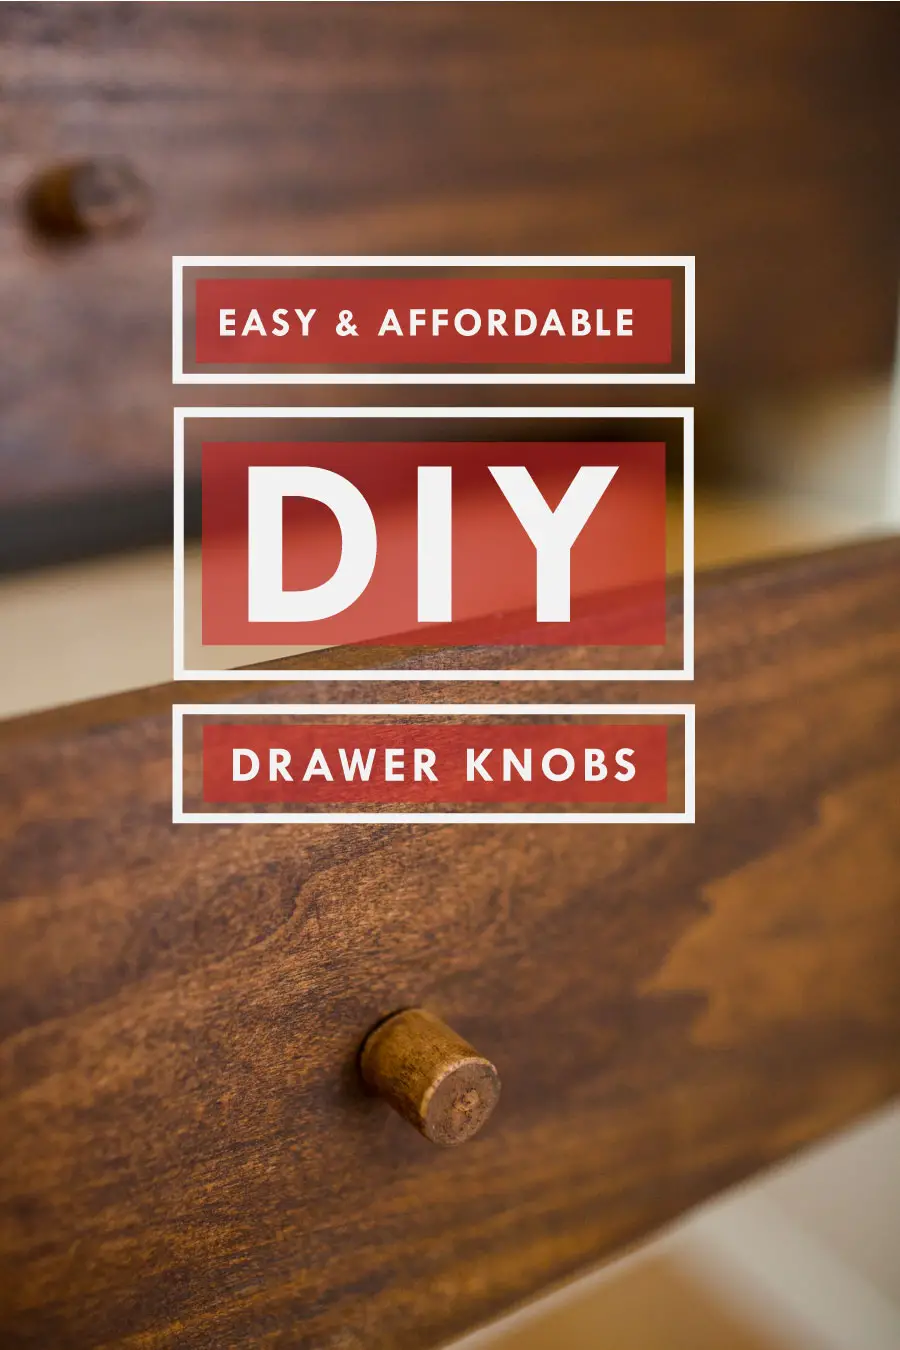 Easy and Affordable DIY drawer knobs